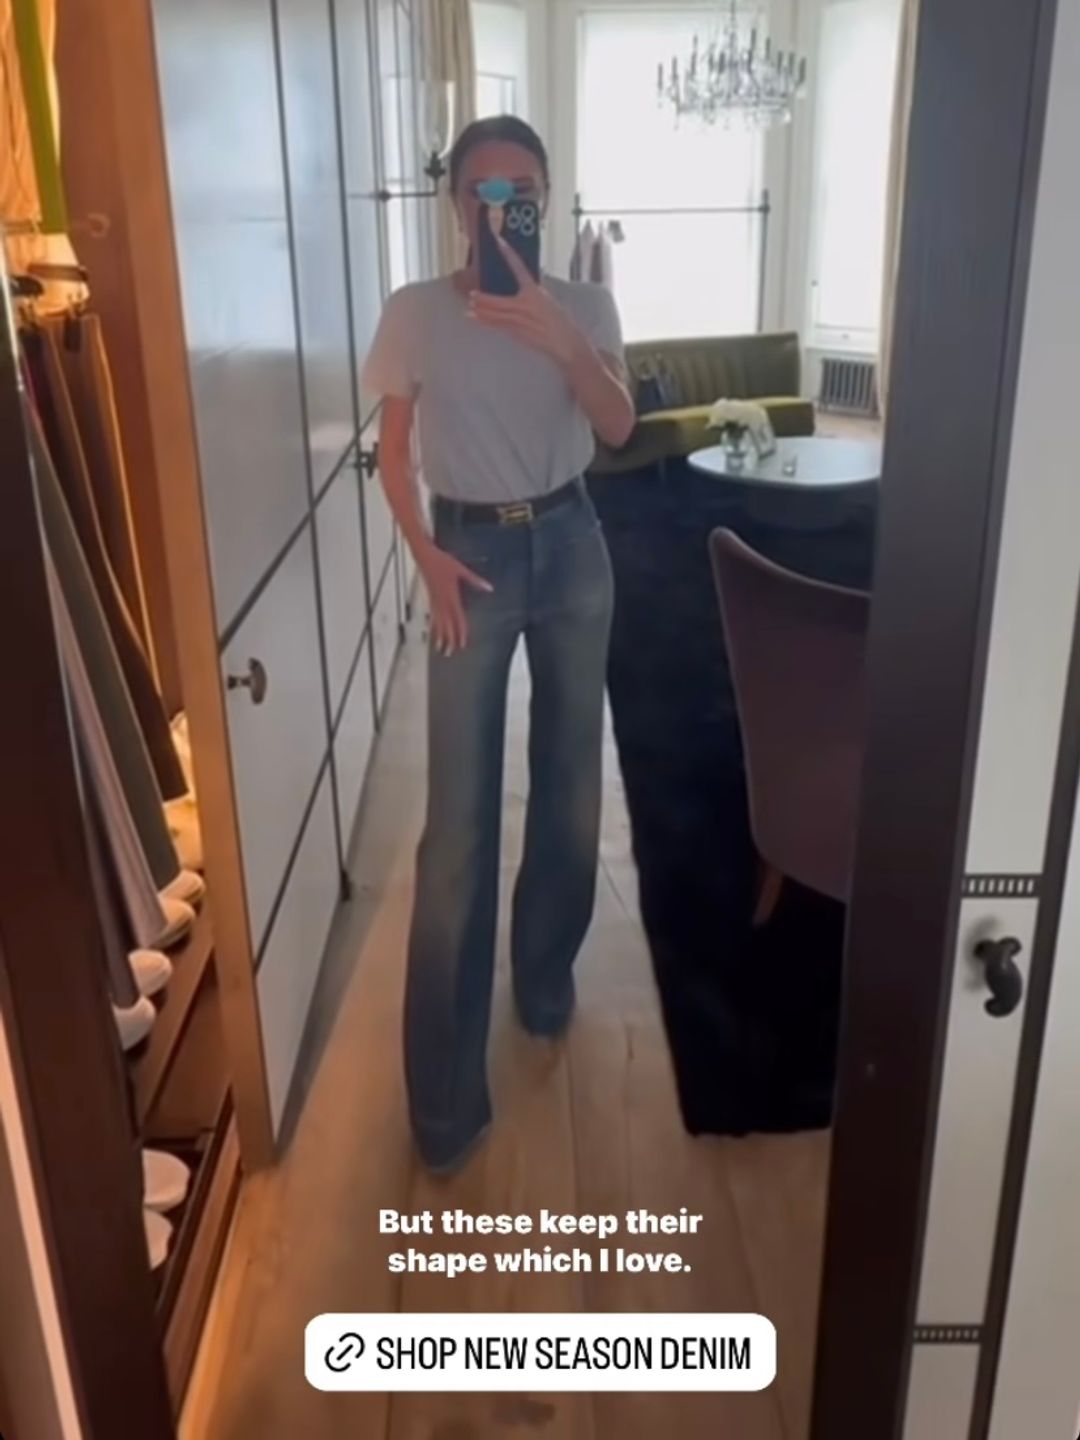 Victoria Beckham wearing jeans and a grey T-shirt